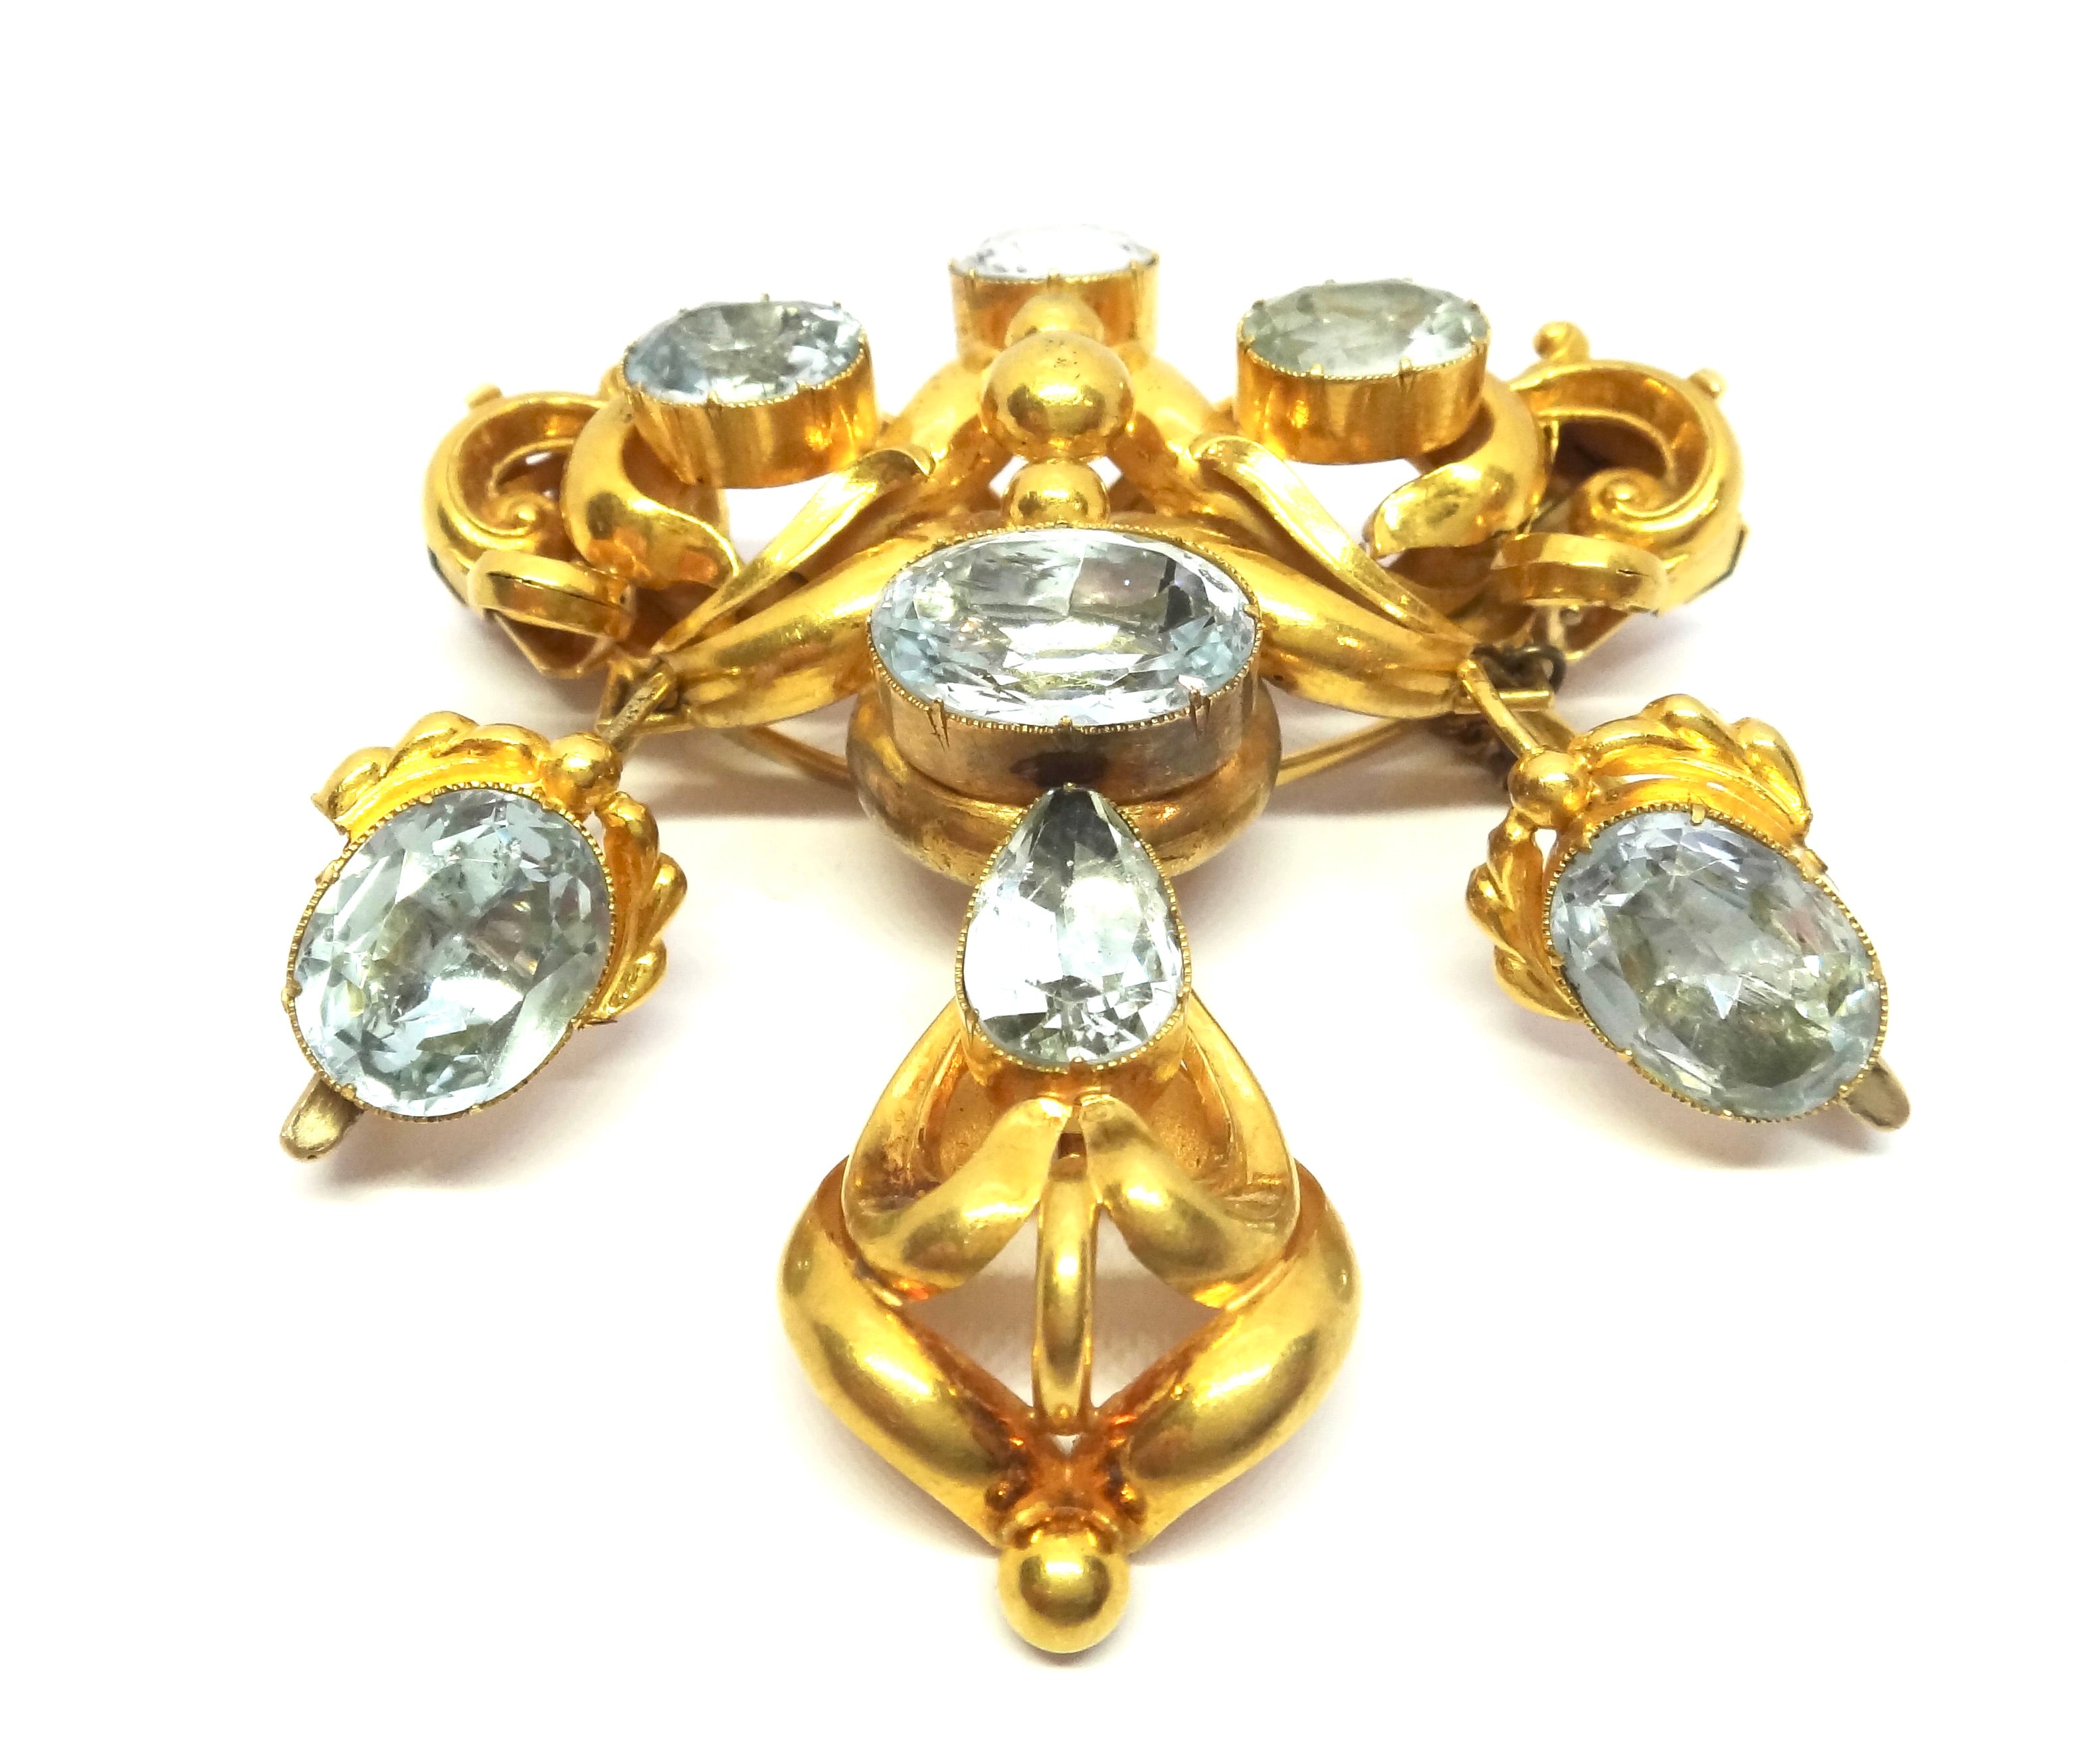 ANTIQUE 18ct Yellow Gold & AQUAMARINE Pendant, Brooch & Earrings VAL $21,500